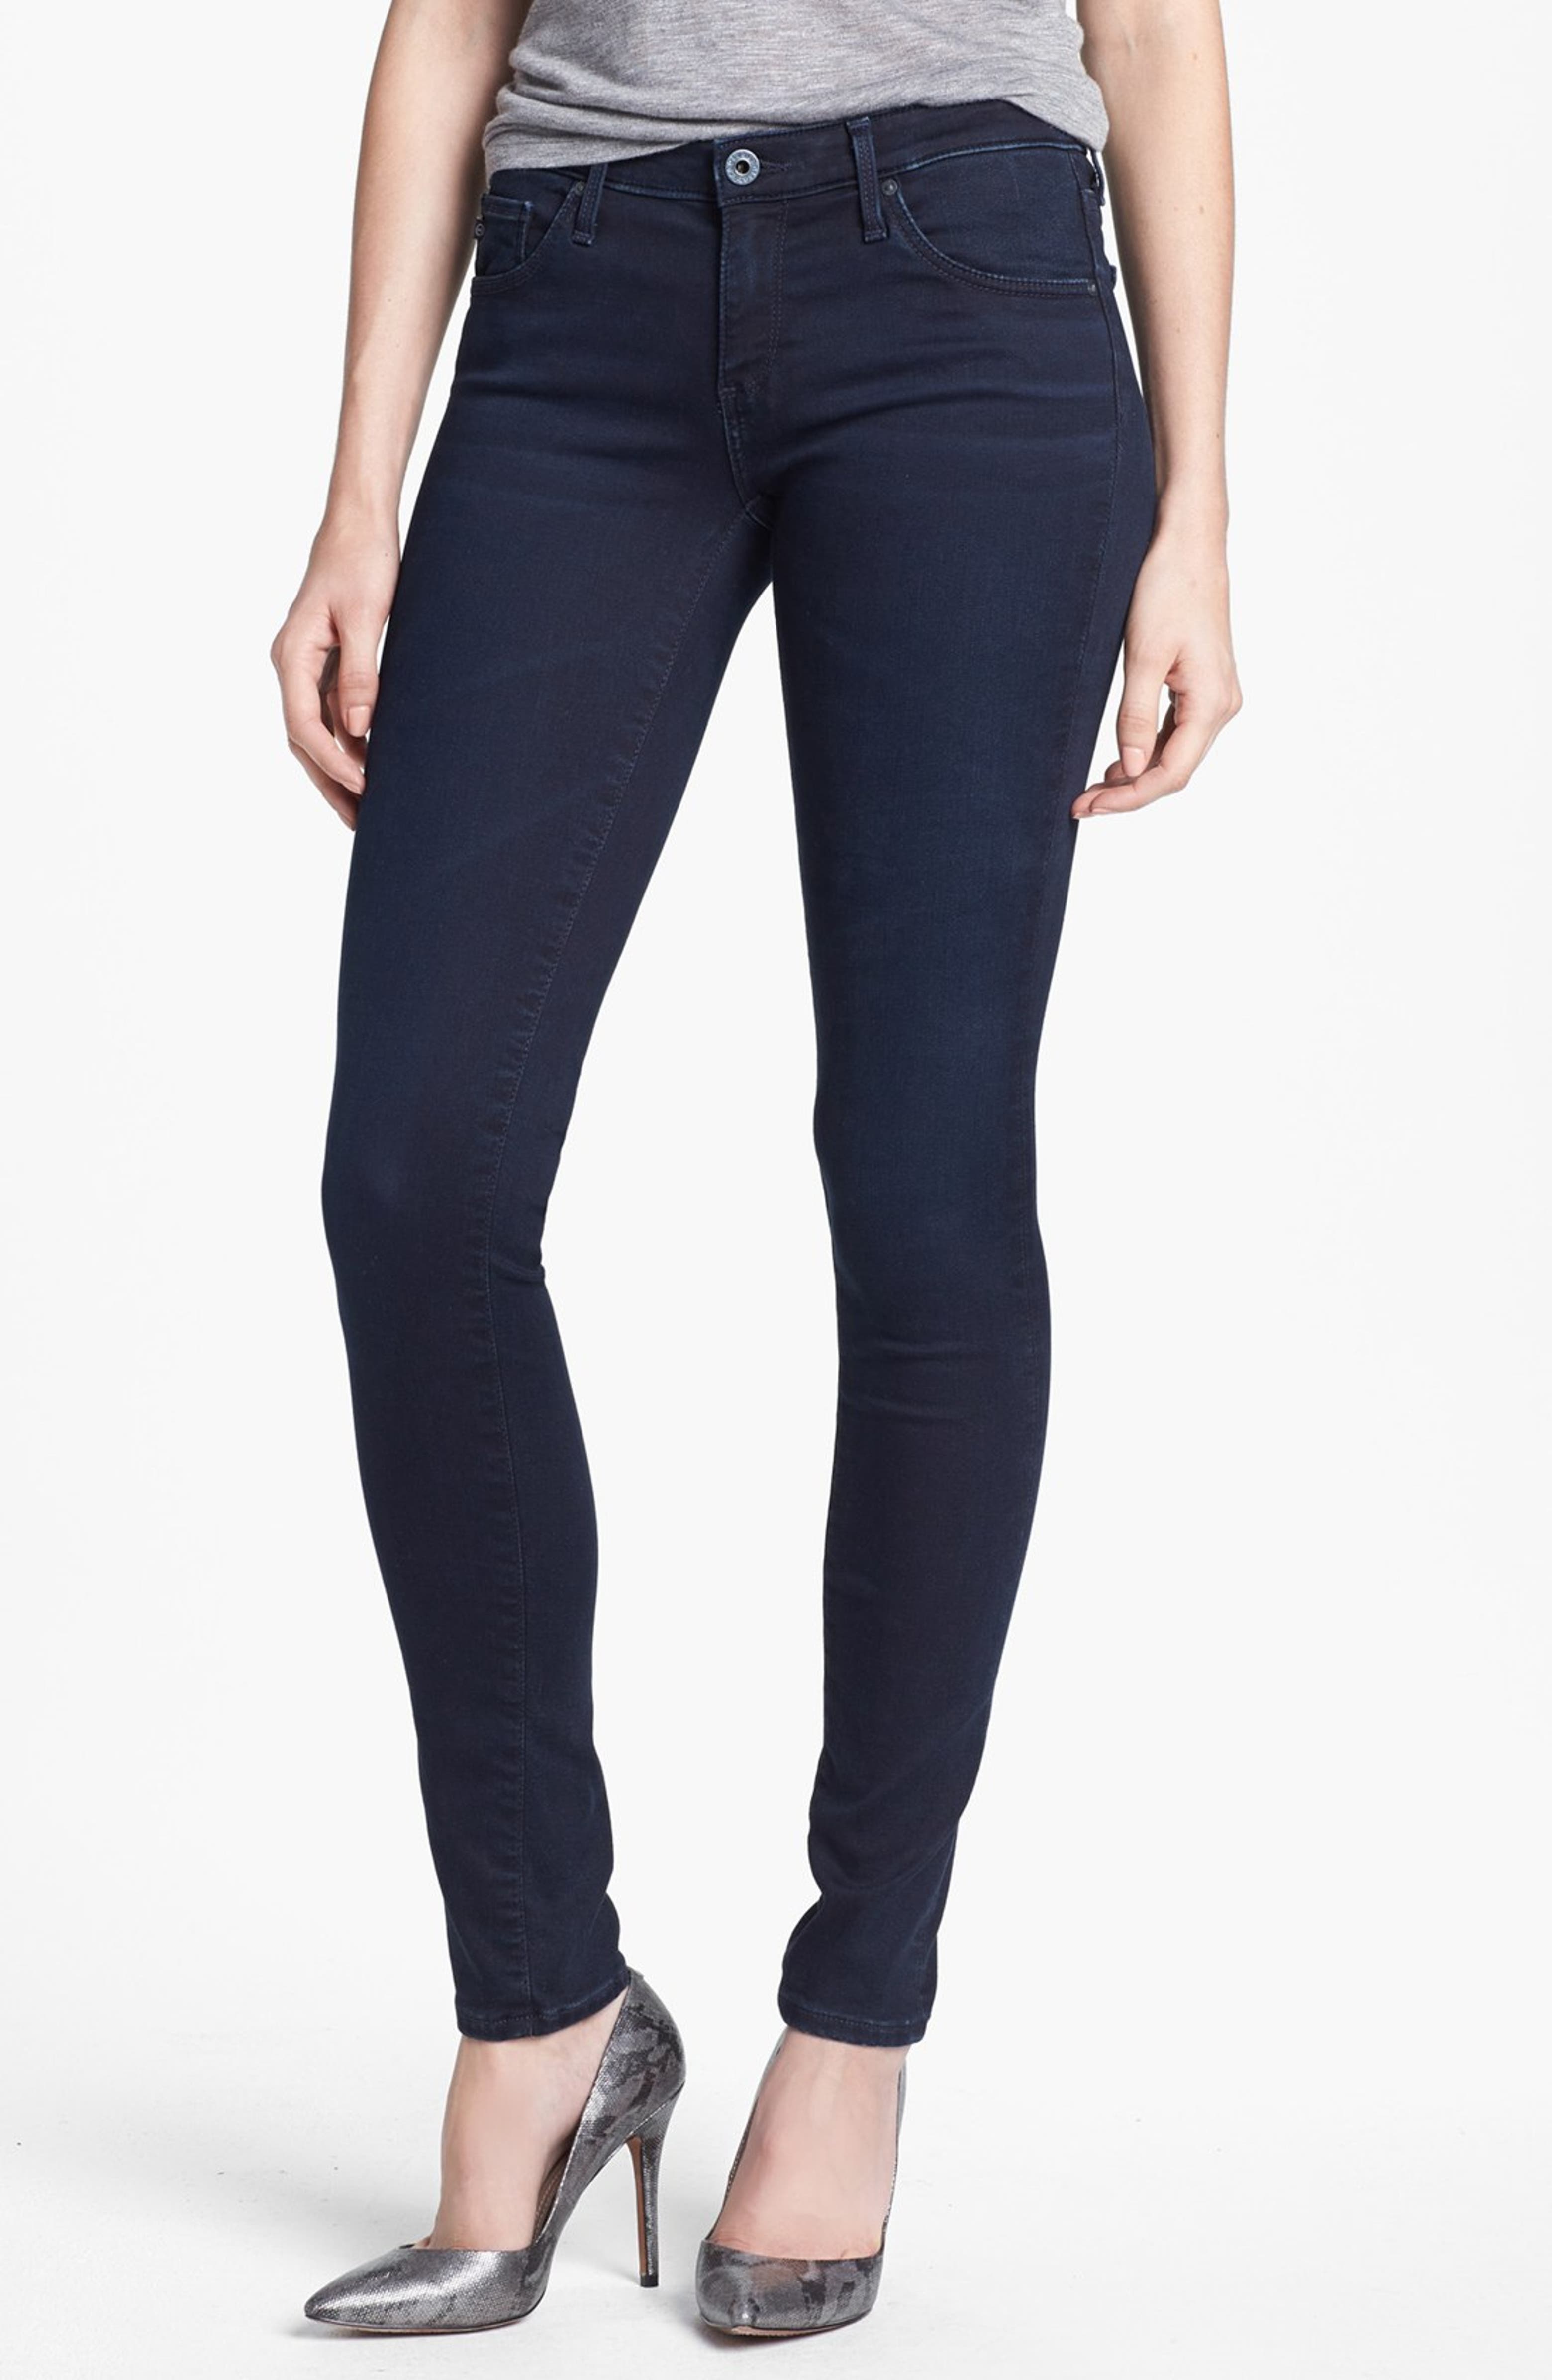 IPNG Design Jean Leggings CLASSIC BSCl-014 Canada USA Online